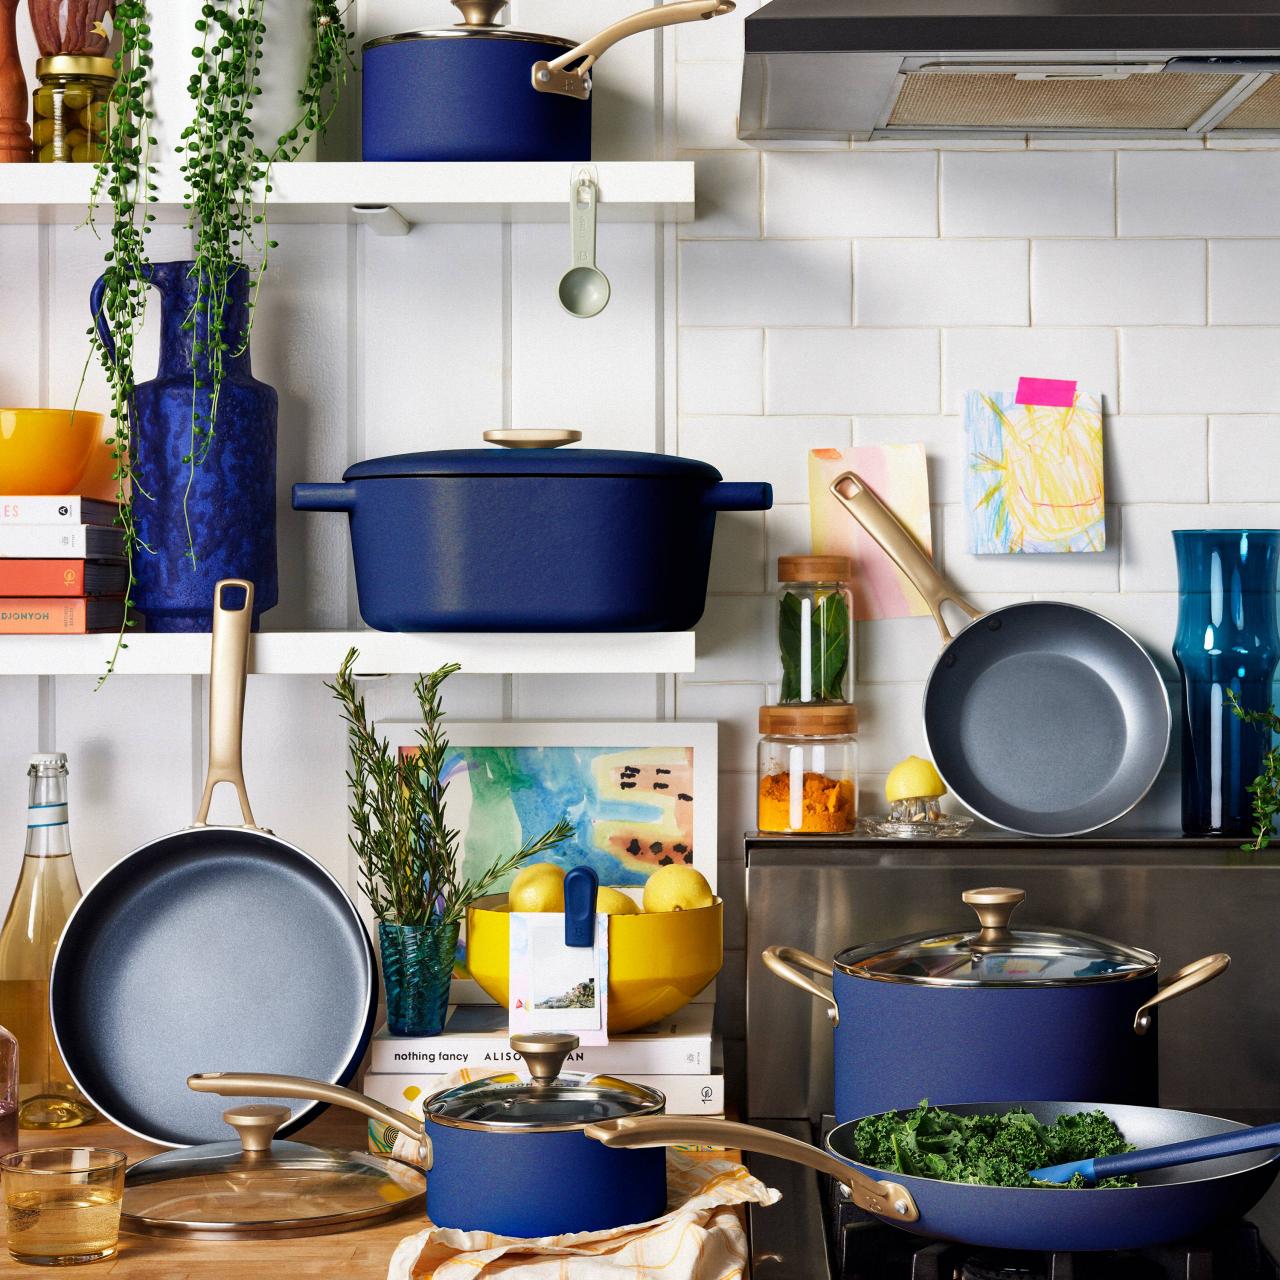 Snag Drew Barrymore's stunning 20-piece cookware set on sale at